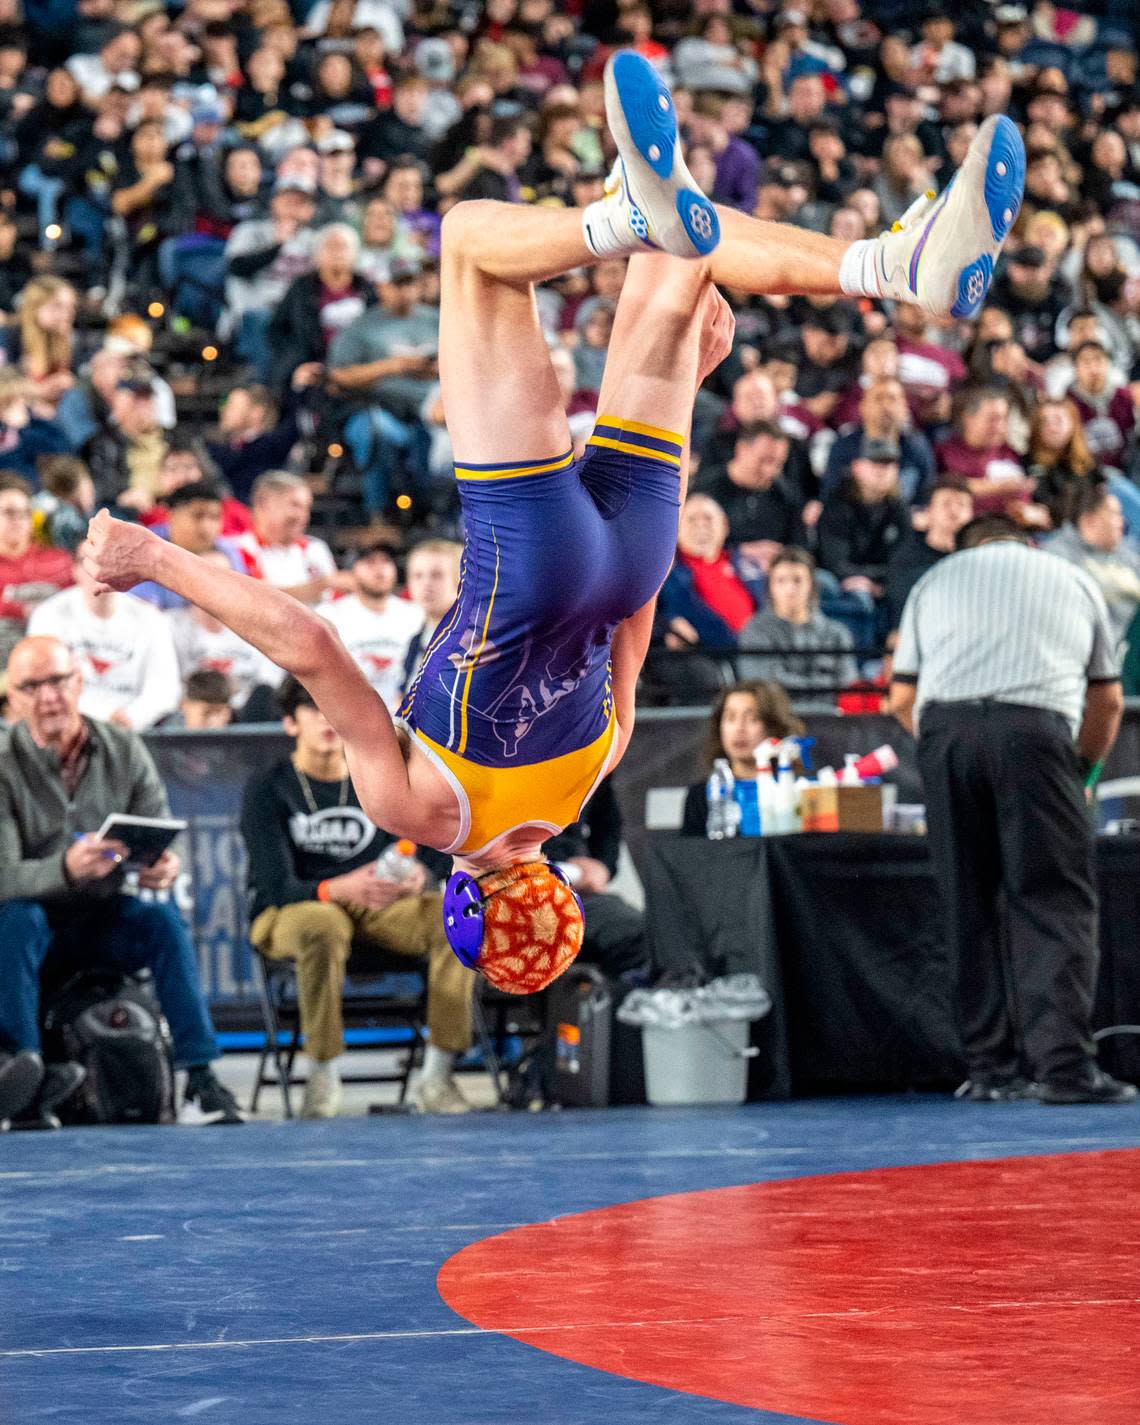 Sumner’s Cody Miller celebrates with a backflip after beating Glacier Peak’s Gil Mossburg, 6-3, in a Class 4A 145-pound championship match at Mat Classic XXXIV on Saturday, Feb. 18, 2023, at the Tacoma Dome in Tacoma, Wash.